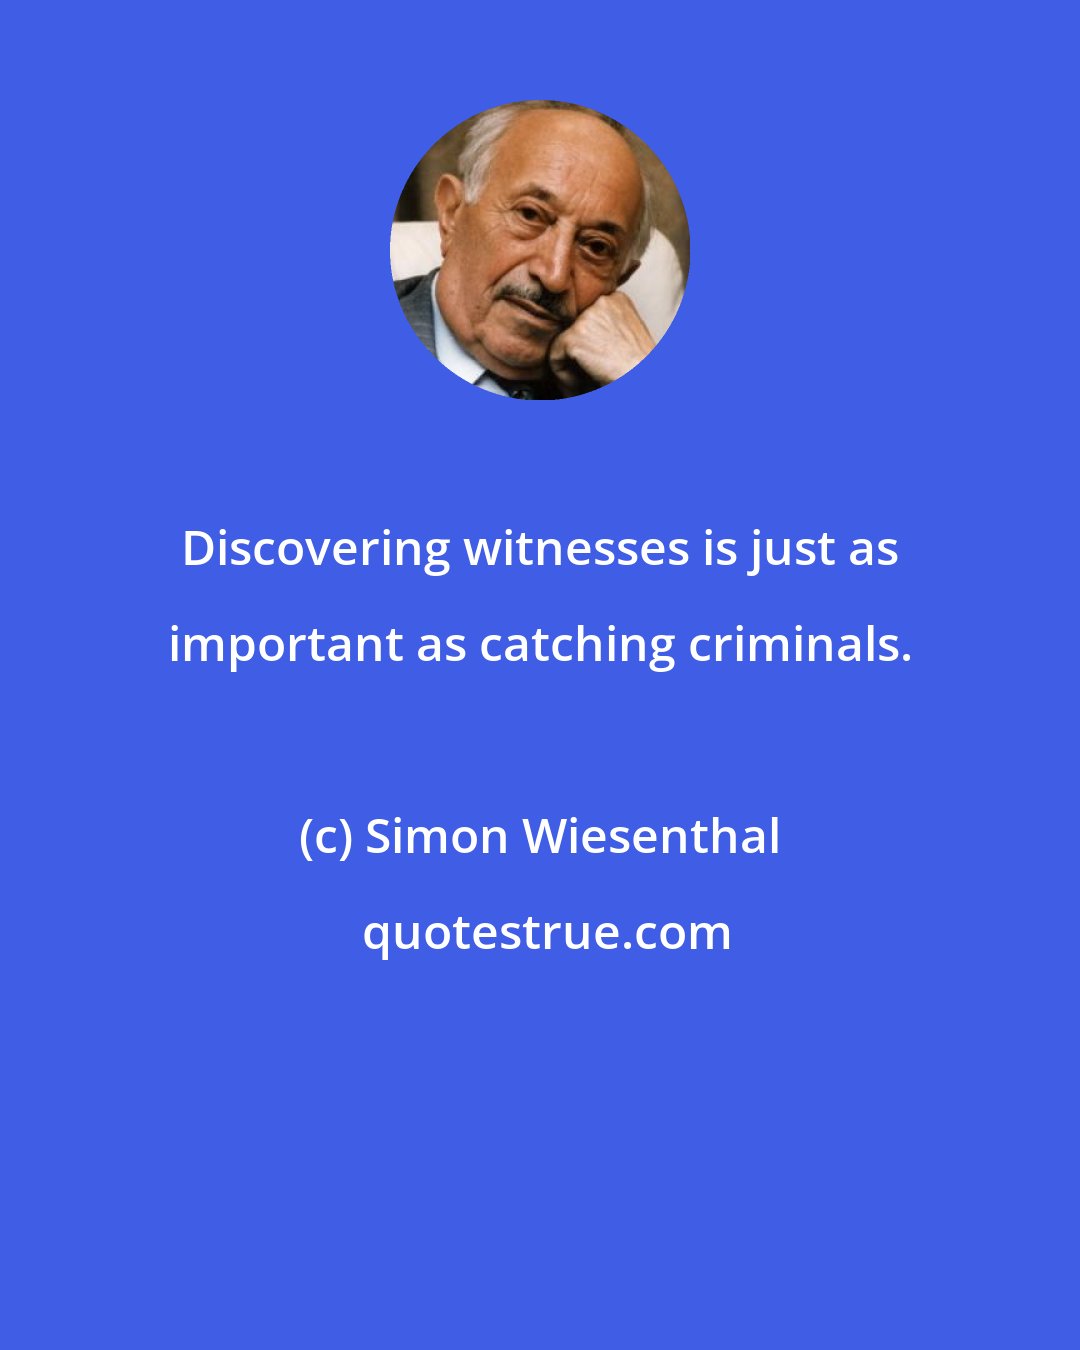 Simon Wiesenthal: Discovering witnesses is just as important as catching criminals.